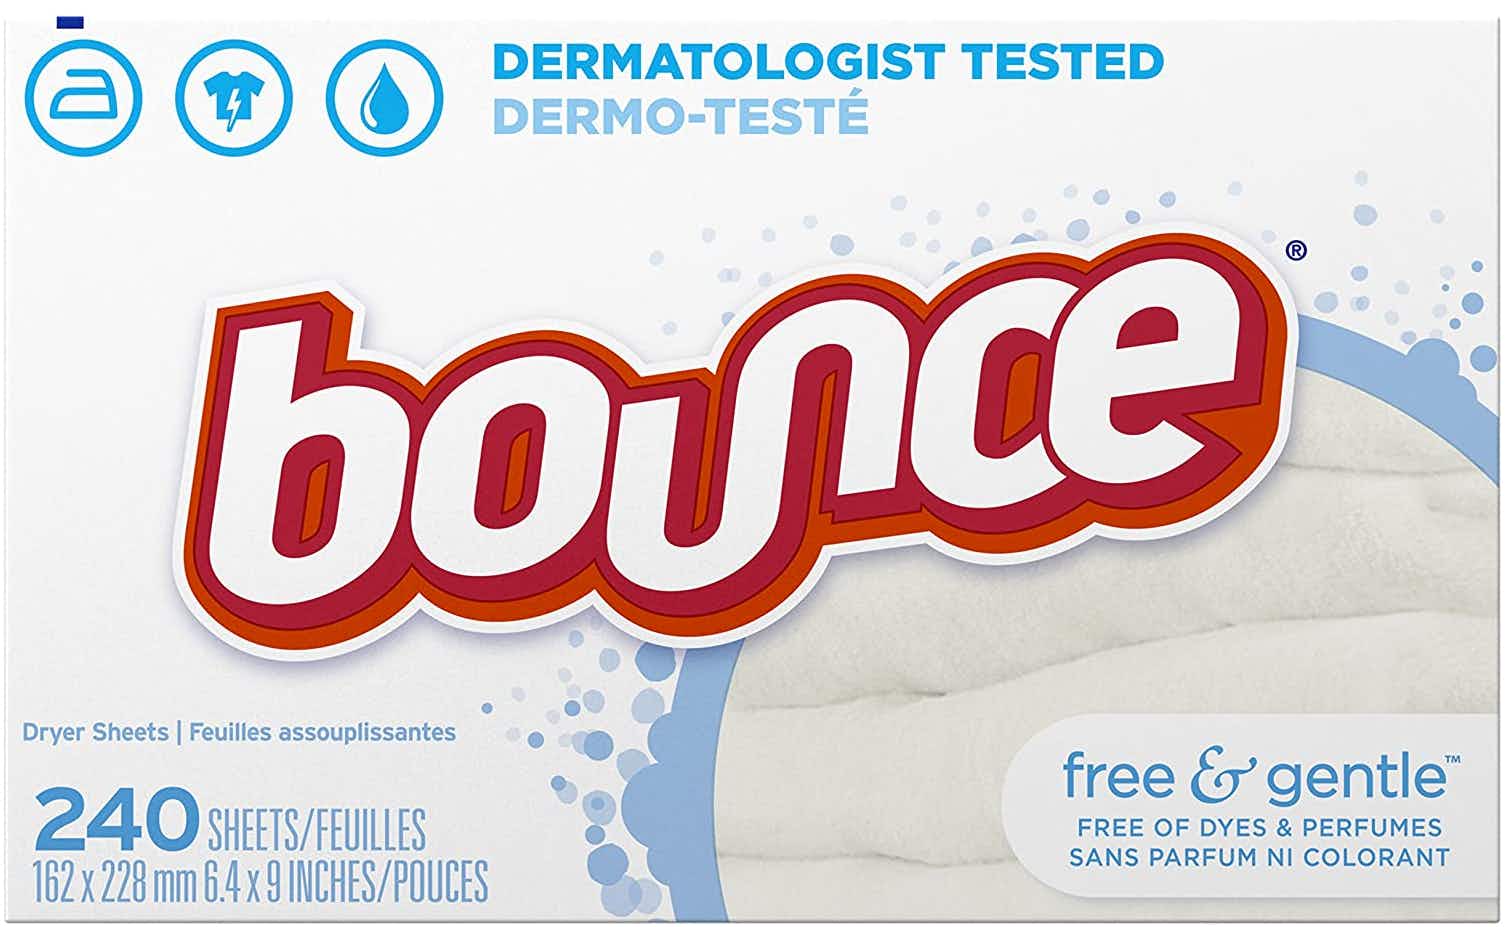 A box of Bounce free and gentle dryer sheets.